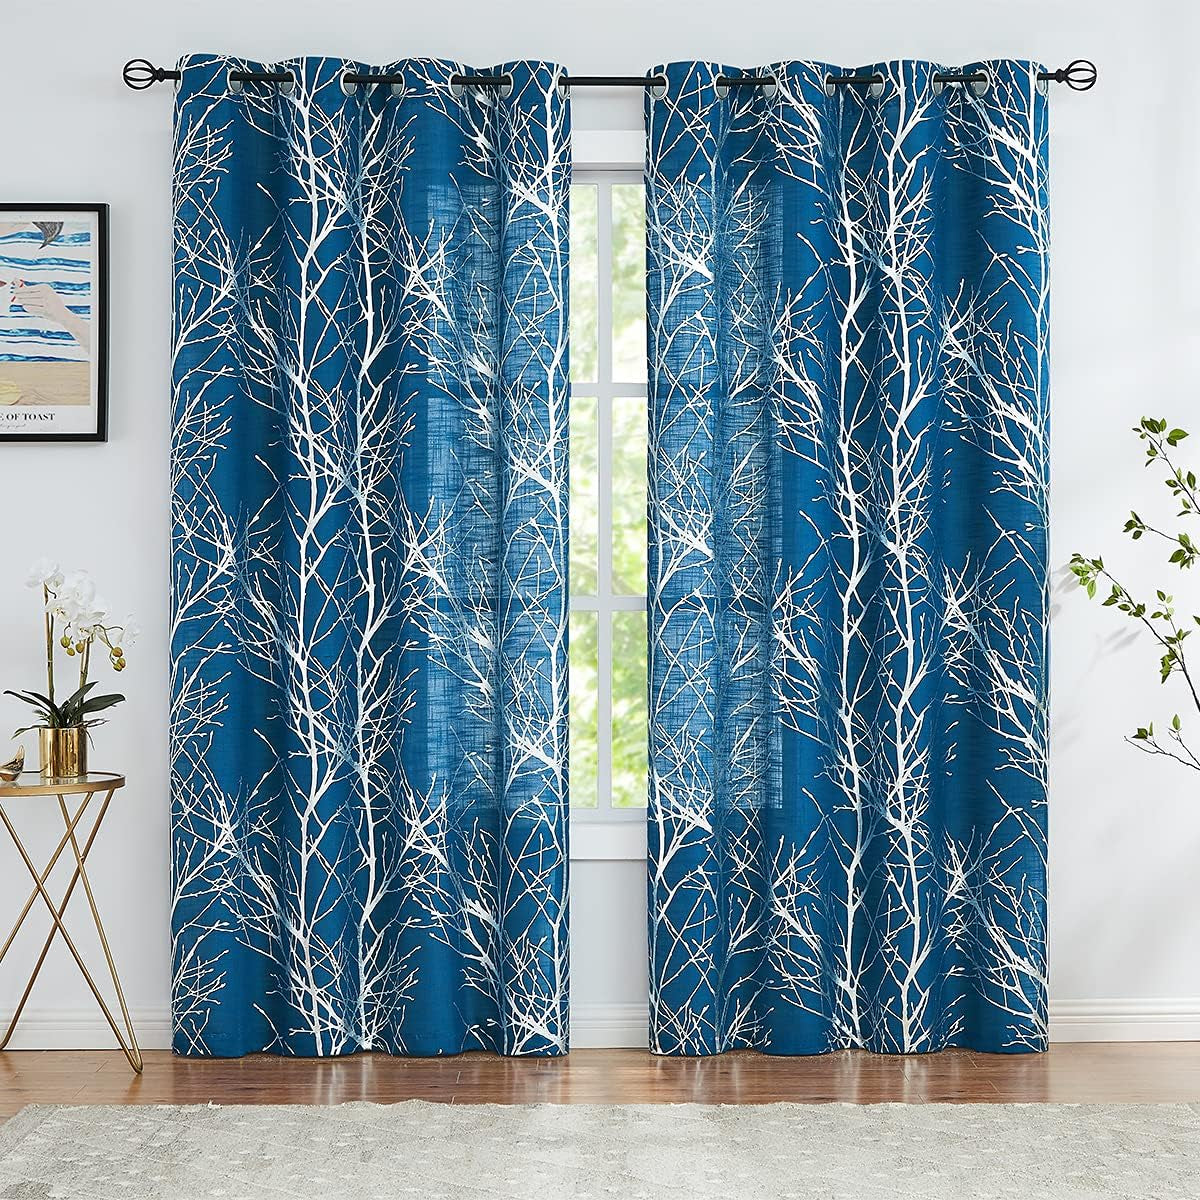 FMFUNCTEX Blue White Curtains for Kitchen Living Room 72“ Grey Tree Branches Print Curtain Set for Small Windows Linen Textured Semi-Sheer Drapes for Bedroom Grommet Top, 2 Panels  Fmfunctex Semi-Sheer: Navy + Foil Silver 50" X 63" |2Pcs 